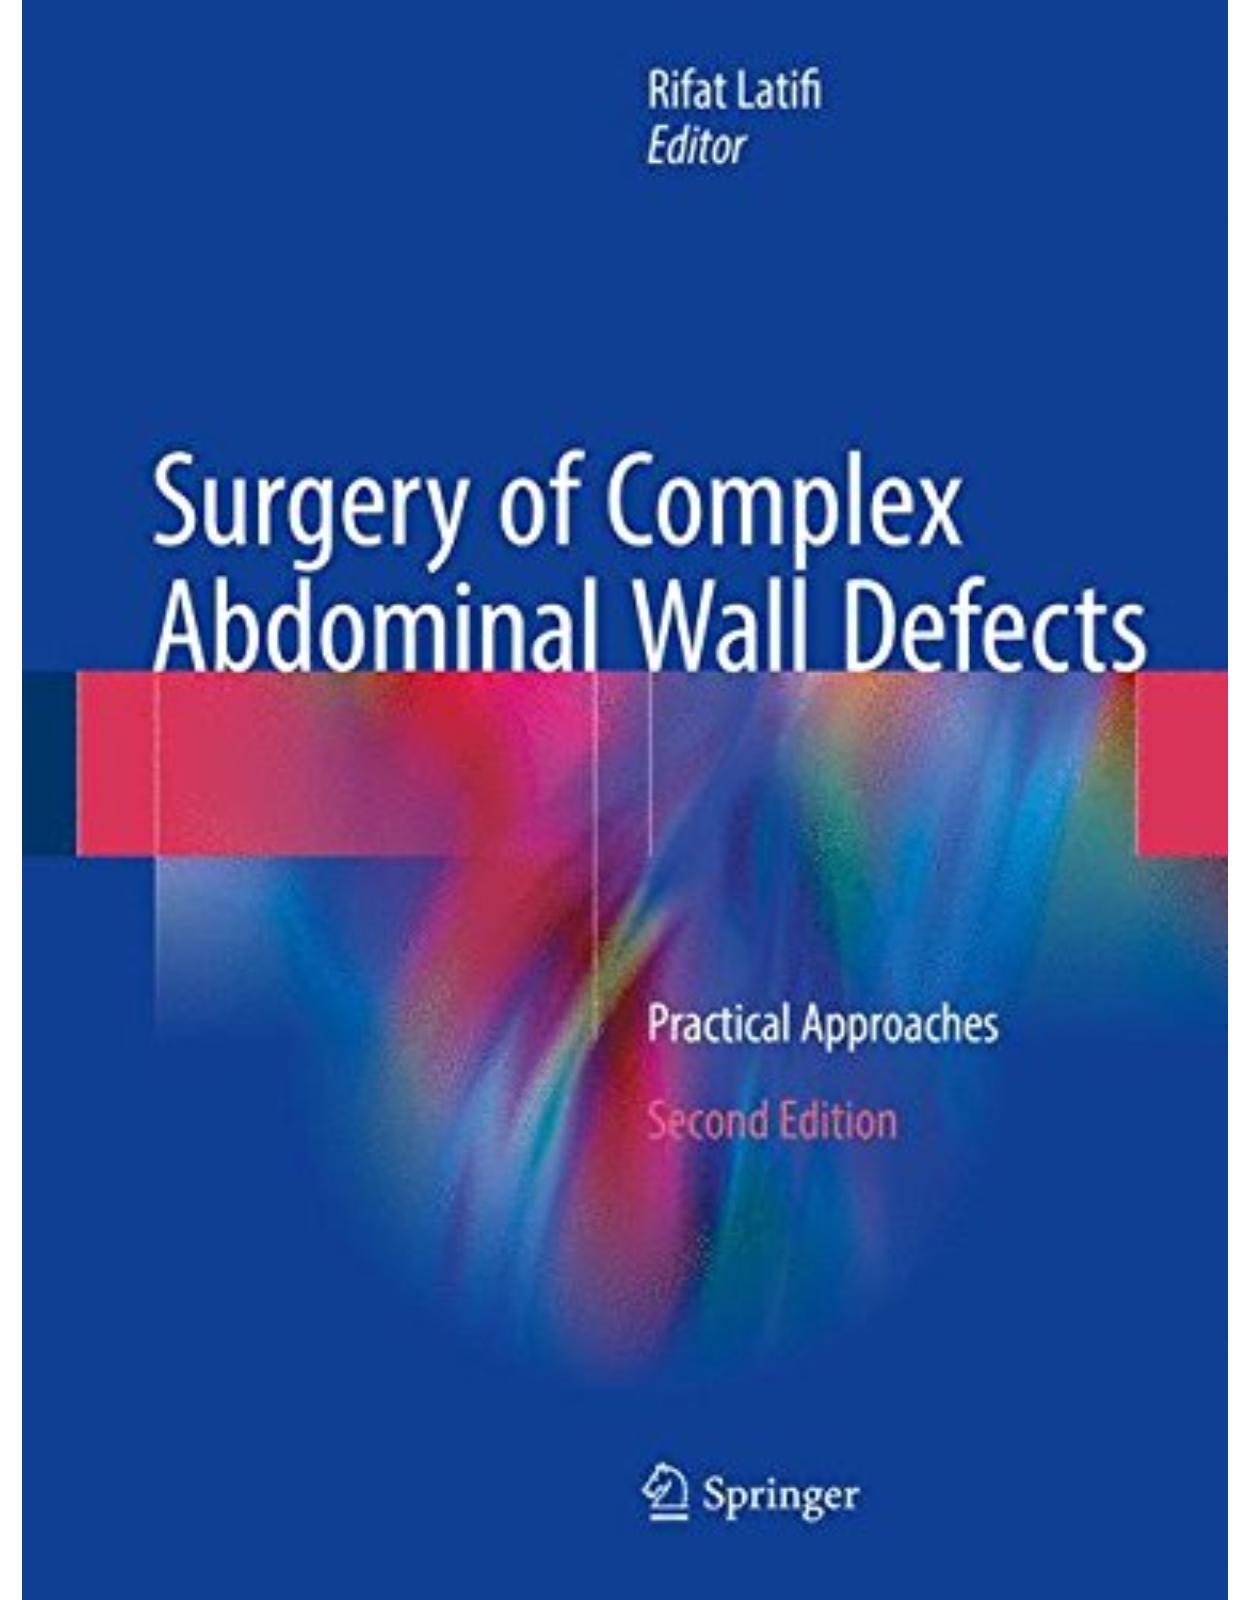 Surgery of Complex Abdominal Wall Defects: Practical Approaches